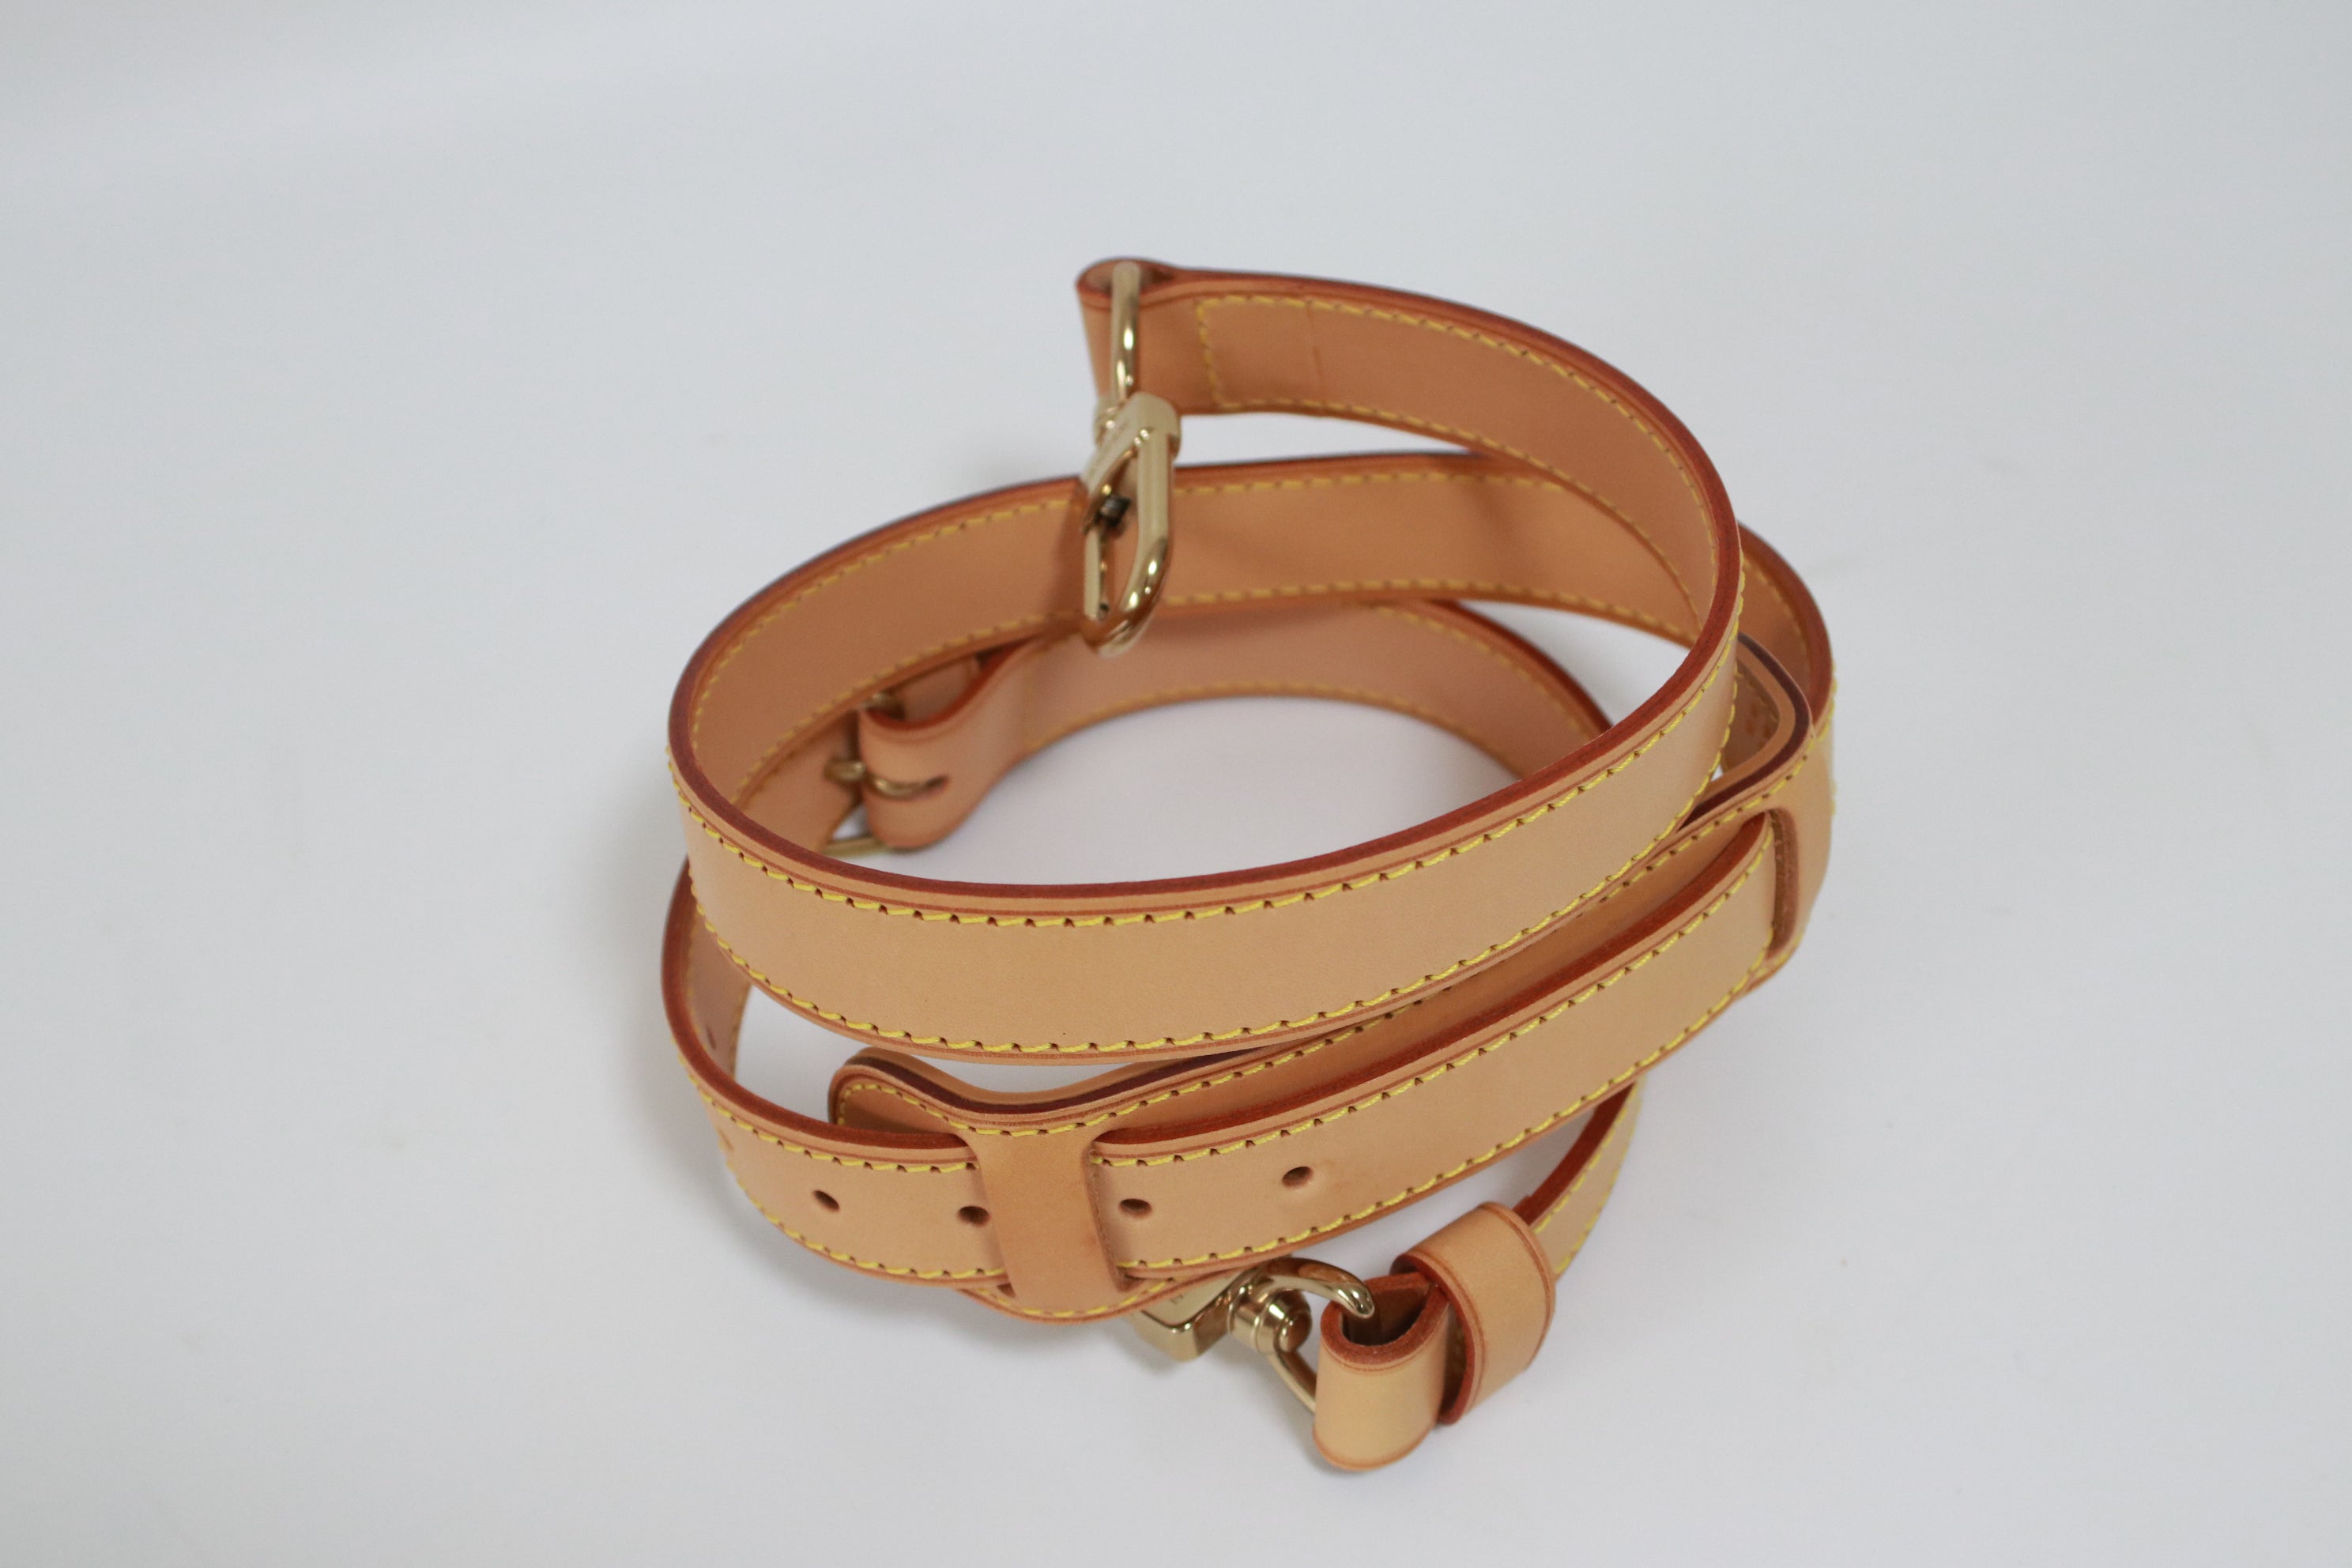 Adjustable Vachetta Leather Straps and Shoulder Straps for Bags 